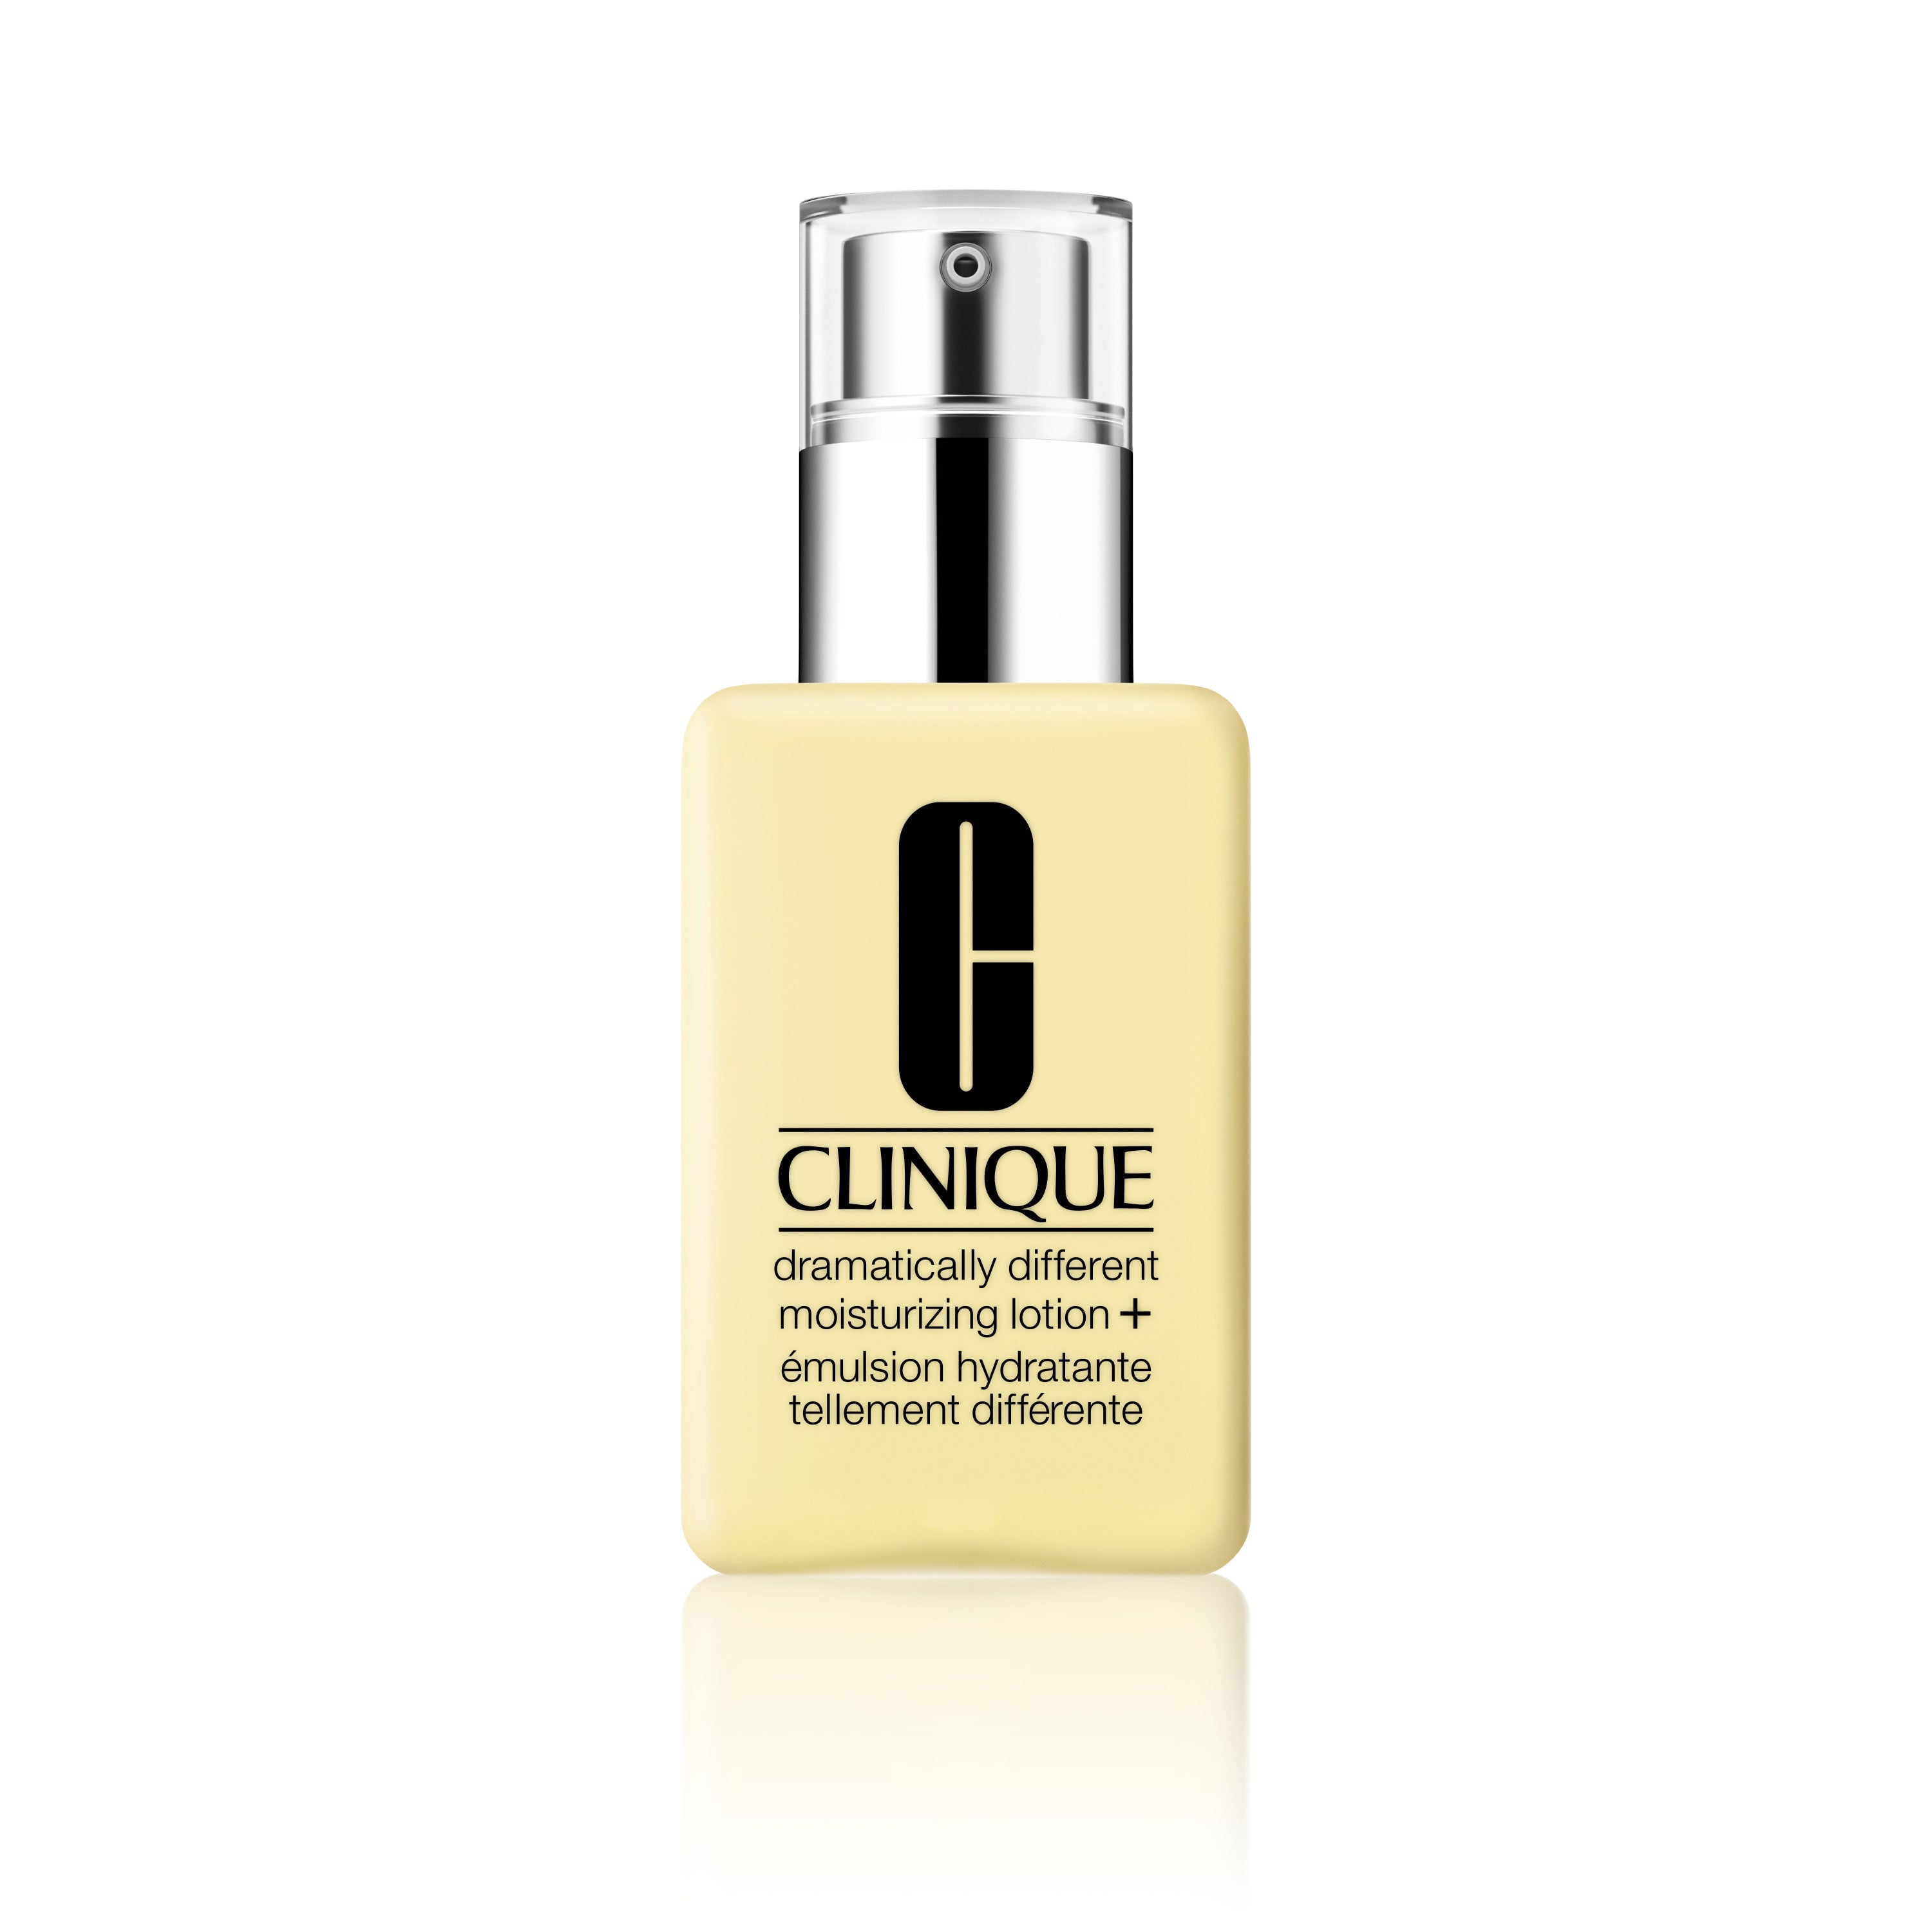 CLINIQUE Dramatically Different Moisturizing Lotion+ Bottle 50ml